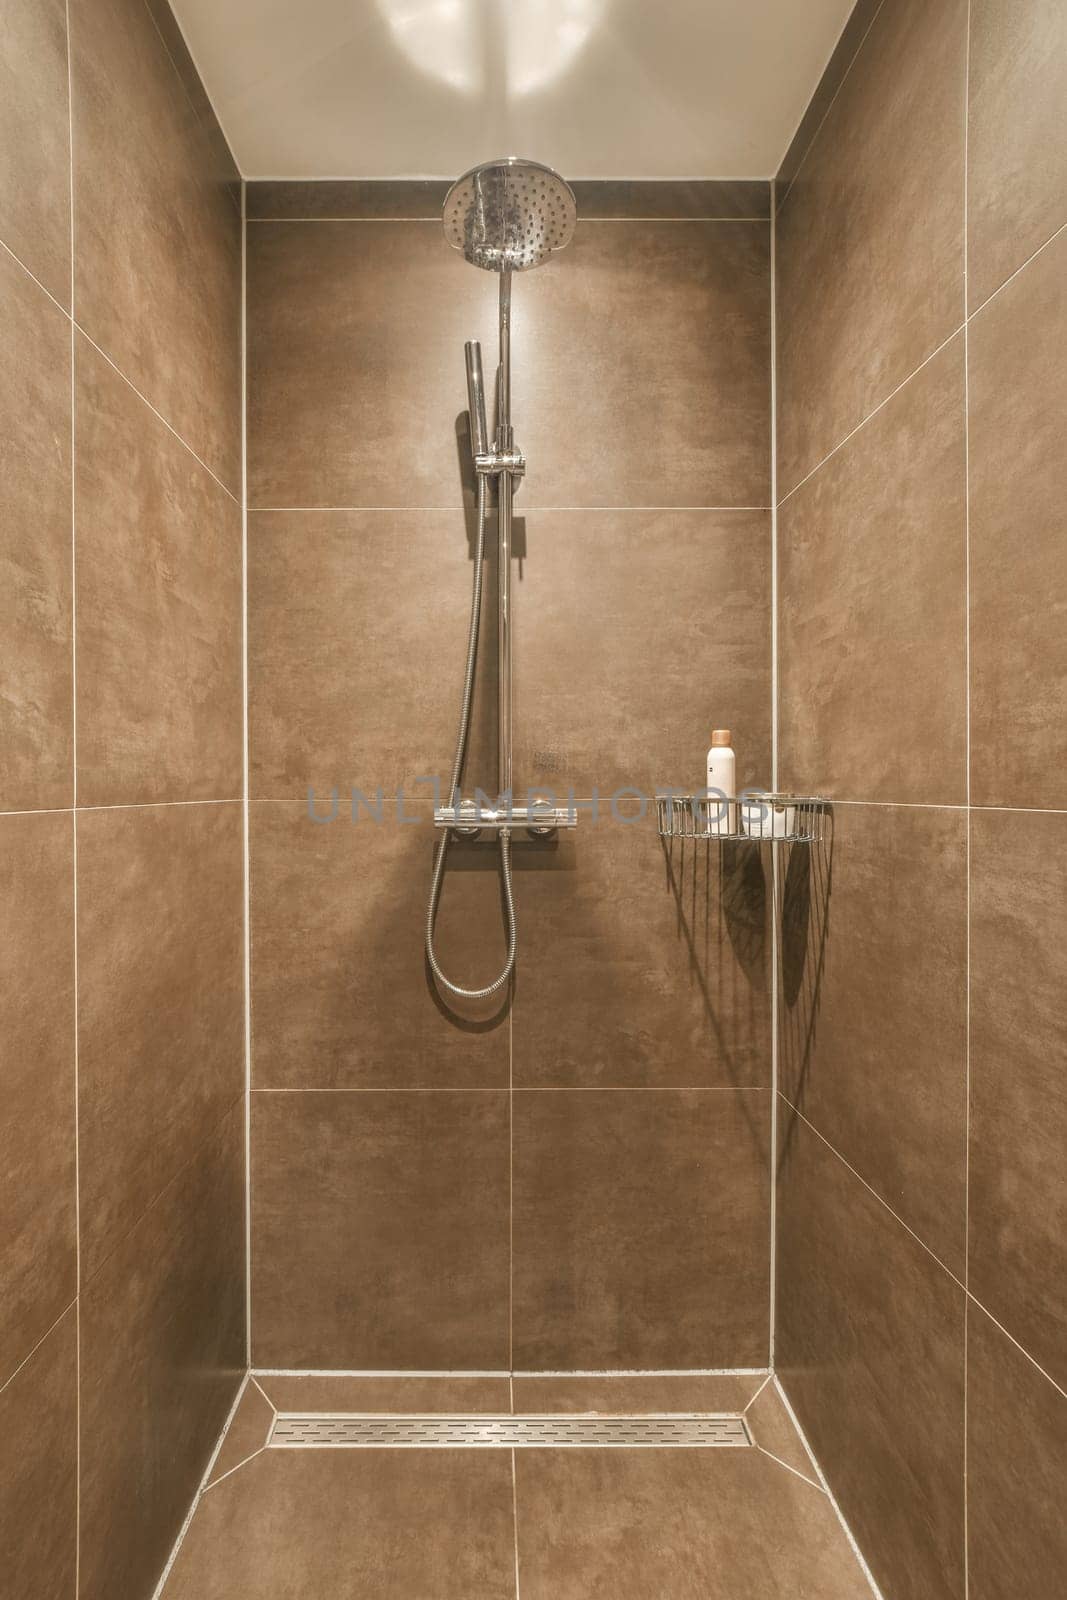 a shower room with brown tiles on the walls and tile around the tub, hand held by an adjustable shower head